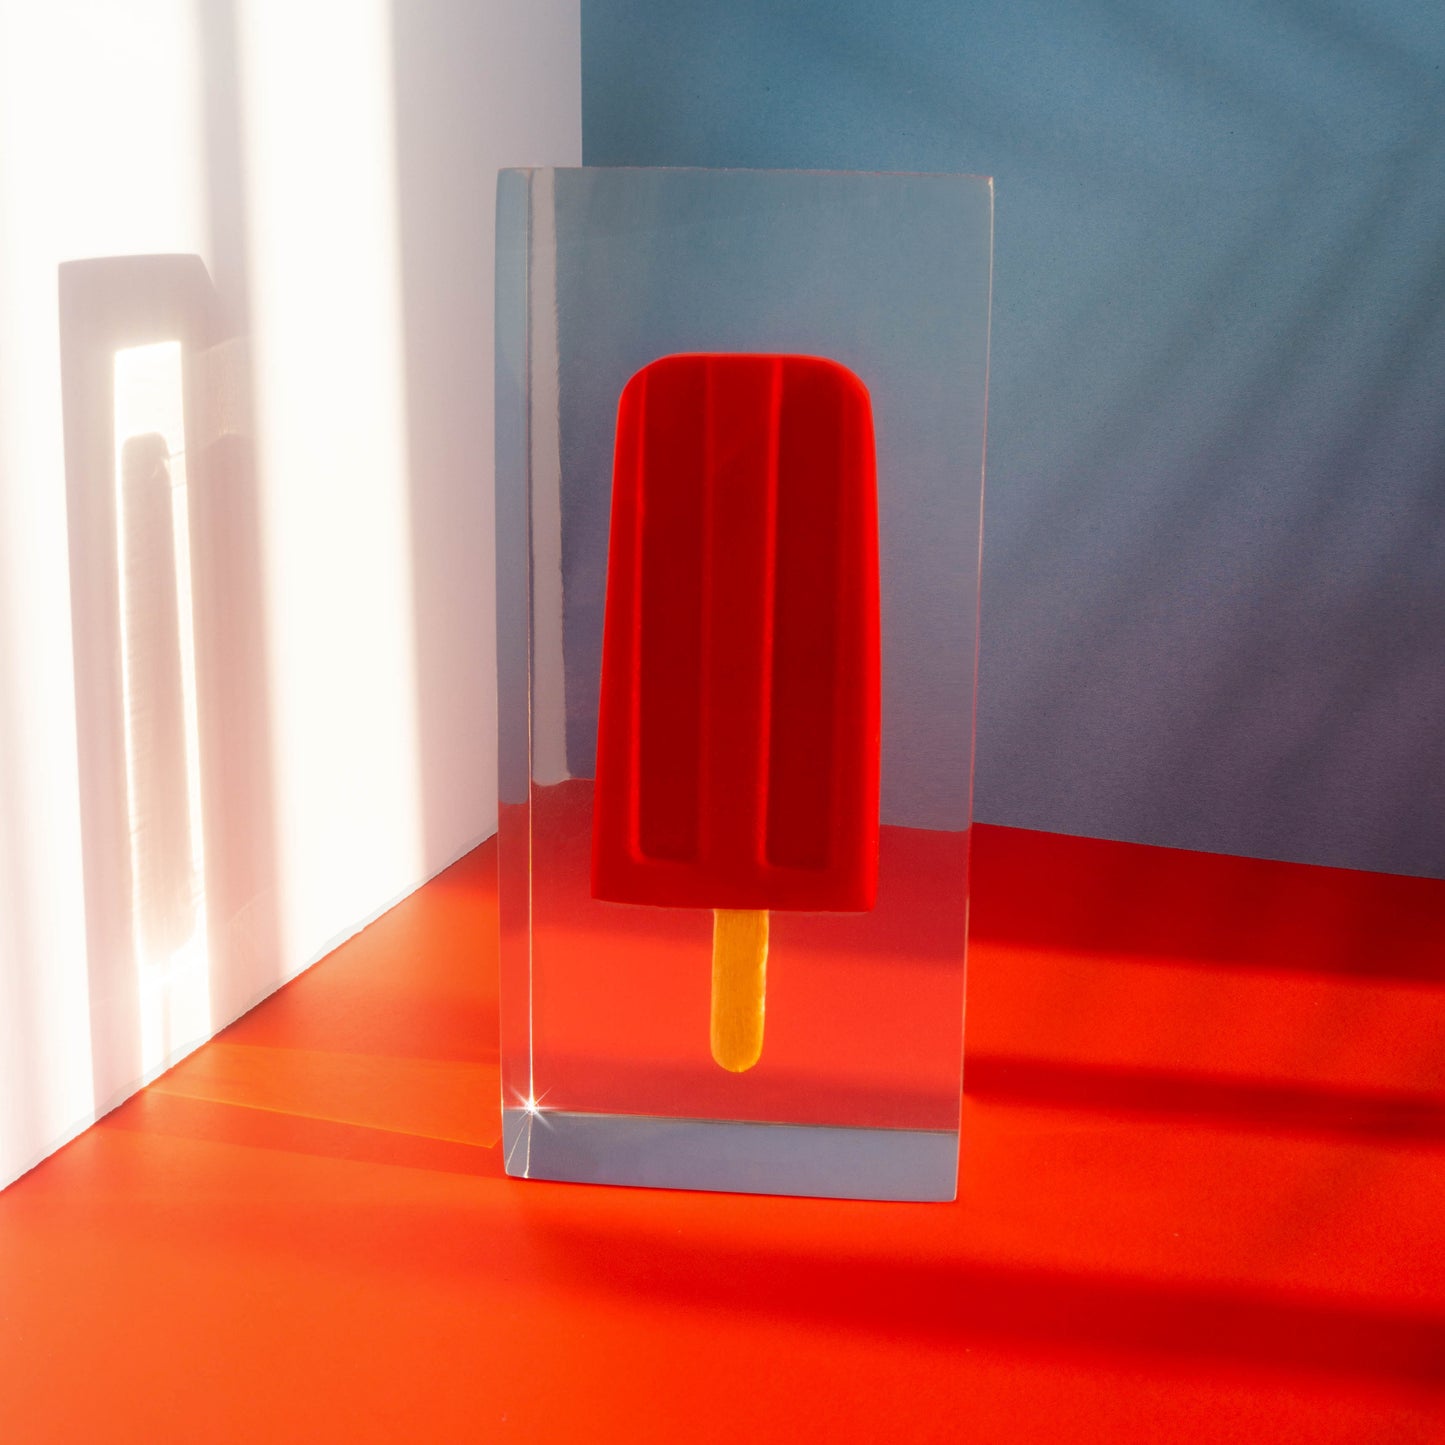 CHERRY BOMB RED FLOATING POPSICLE RESIN SCULPTURE